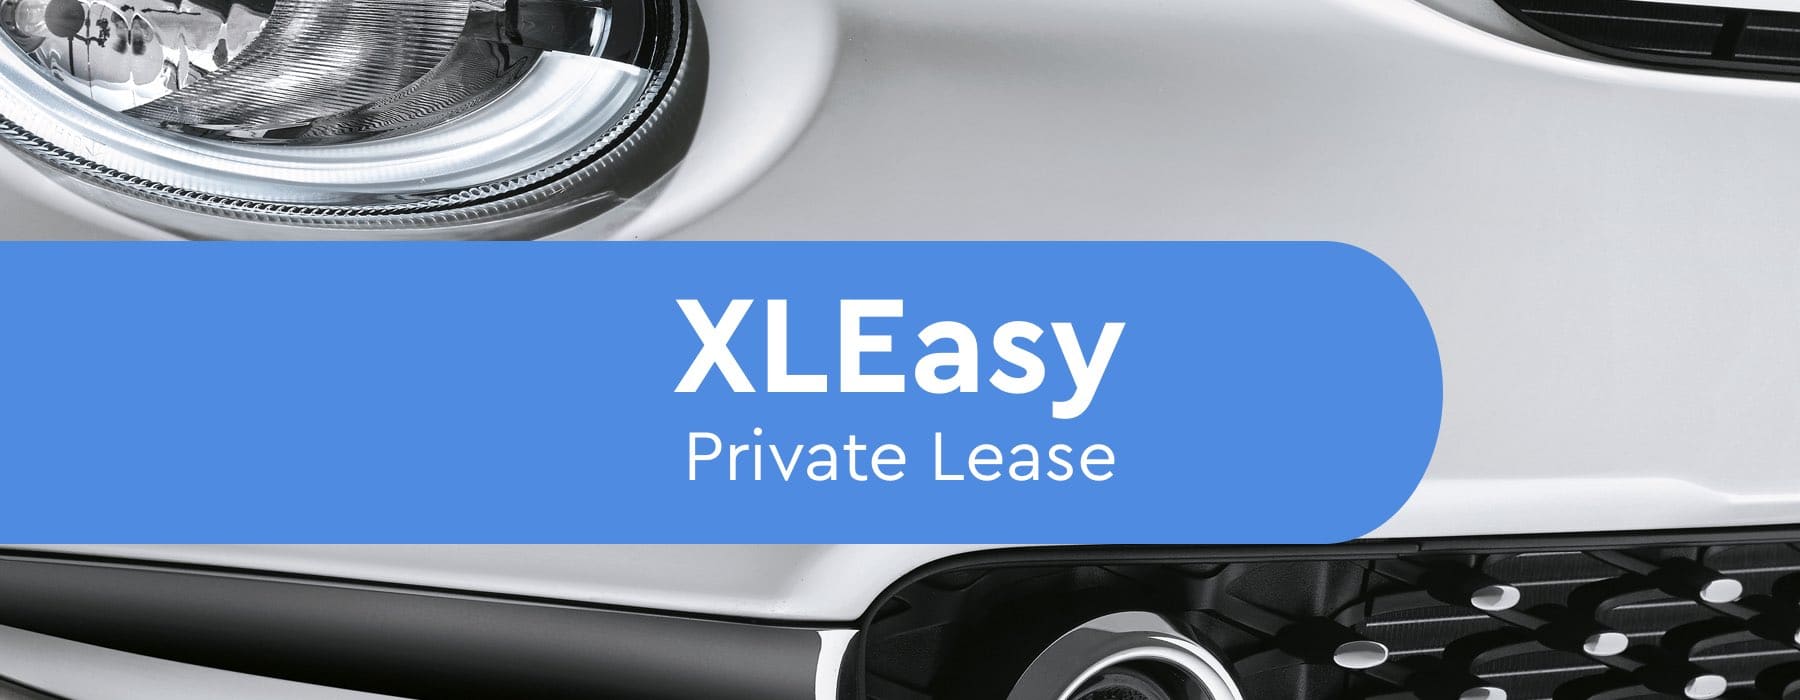 xleasy Private Lease